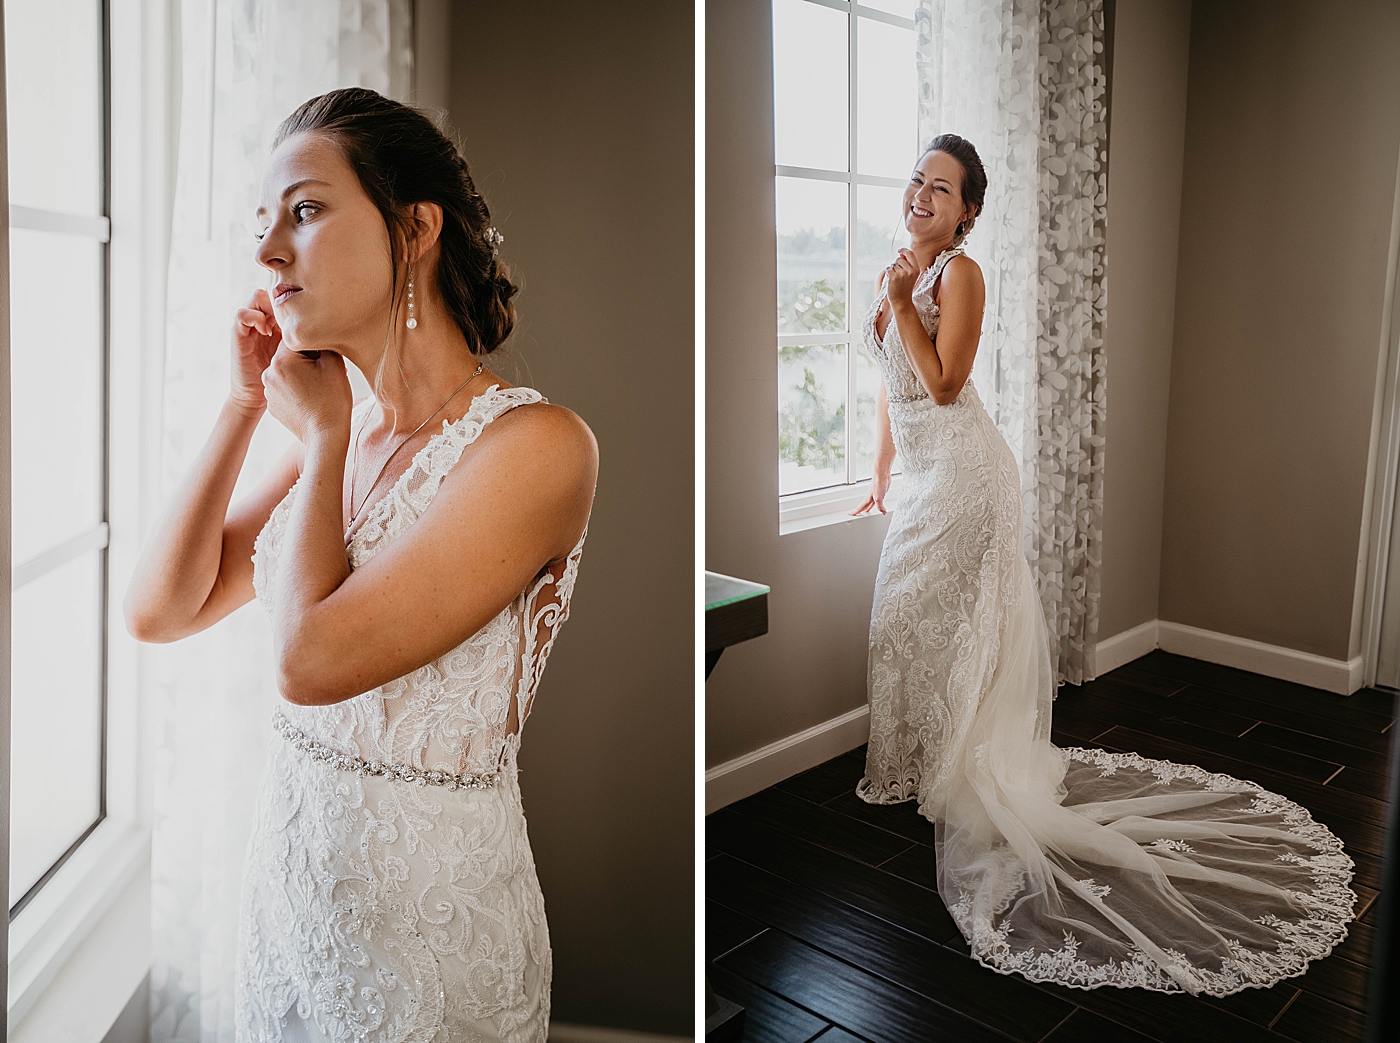 Bride putting earrings on by window Out of the Blue Celebrations Wedding Photography captured by South Florida Wedding Photographer Krystal Capone Photography 